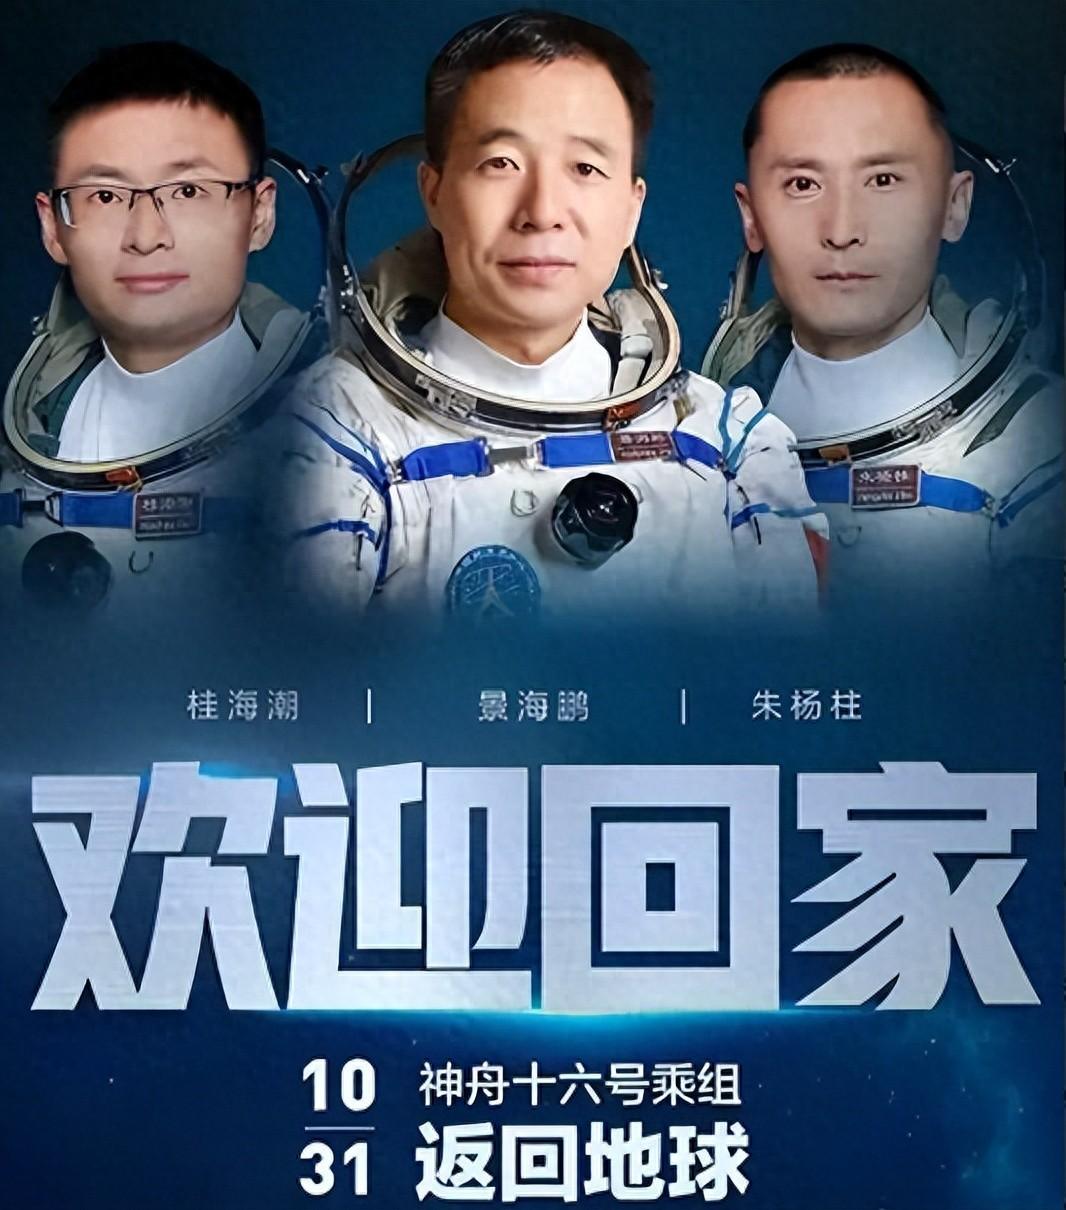 Safe arrival! Now I realize that the Shenzhou 16 was under such tremendous pressure